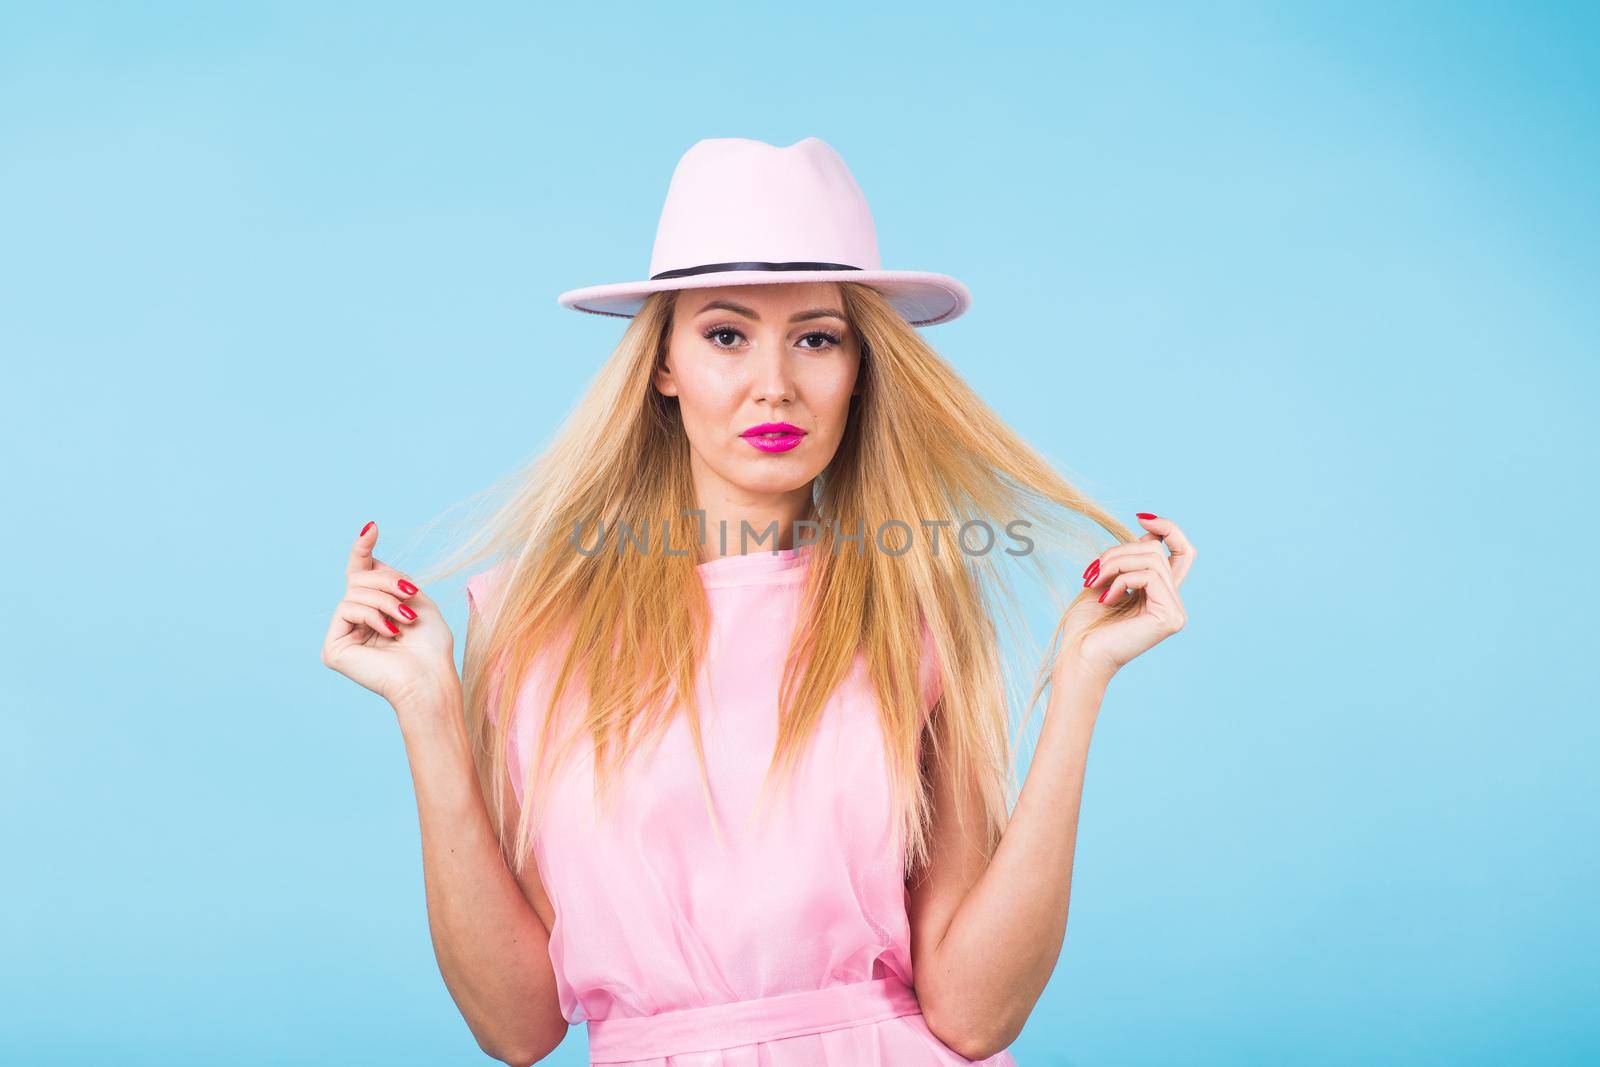 Beautiful woman with long straight blond hair. Fashion model posing at studio.